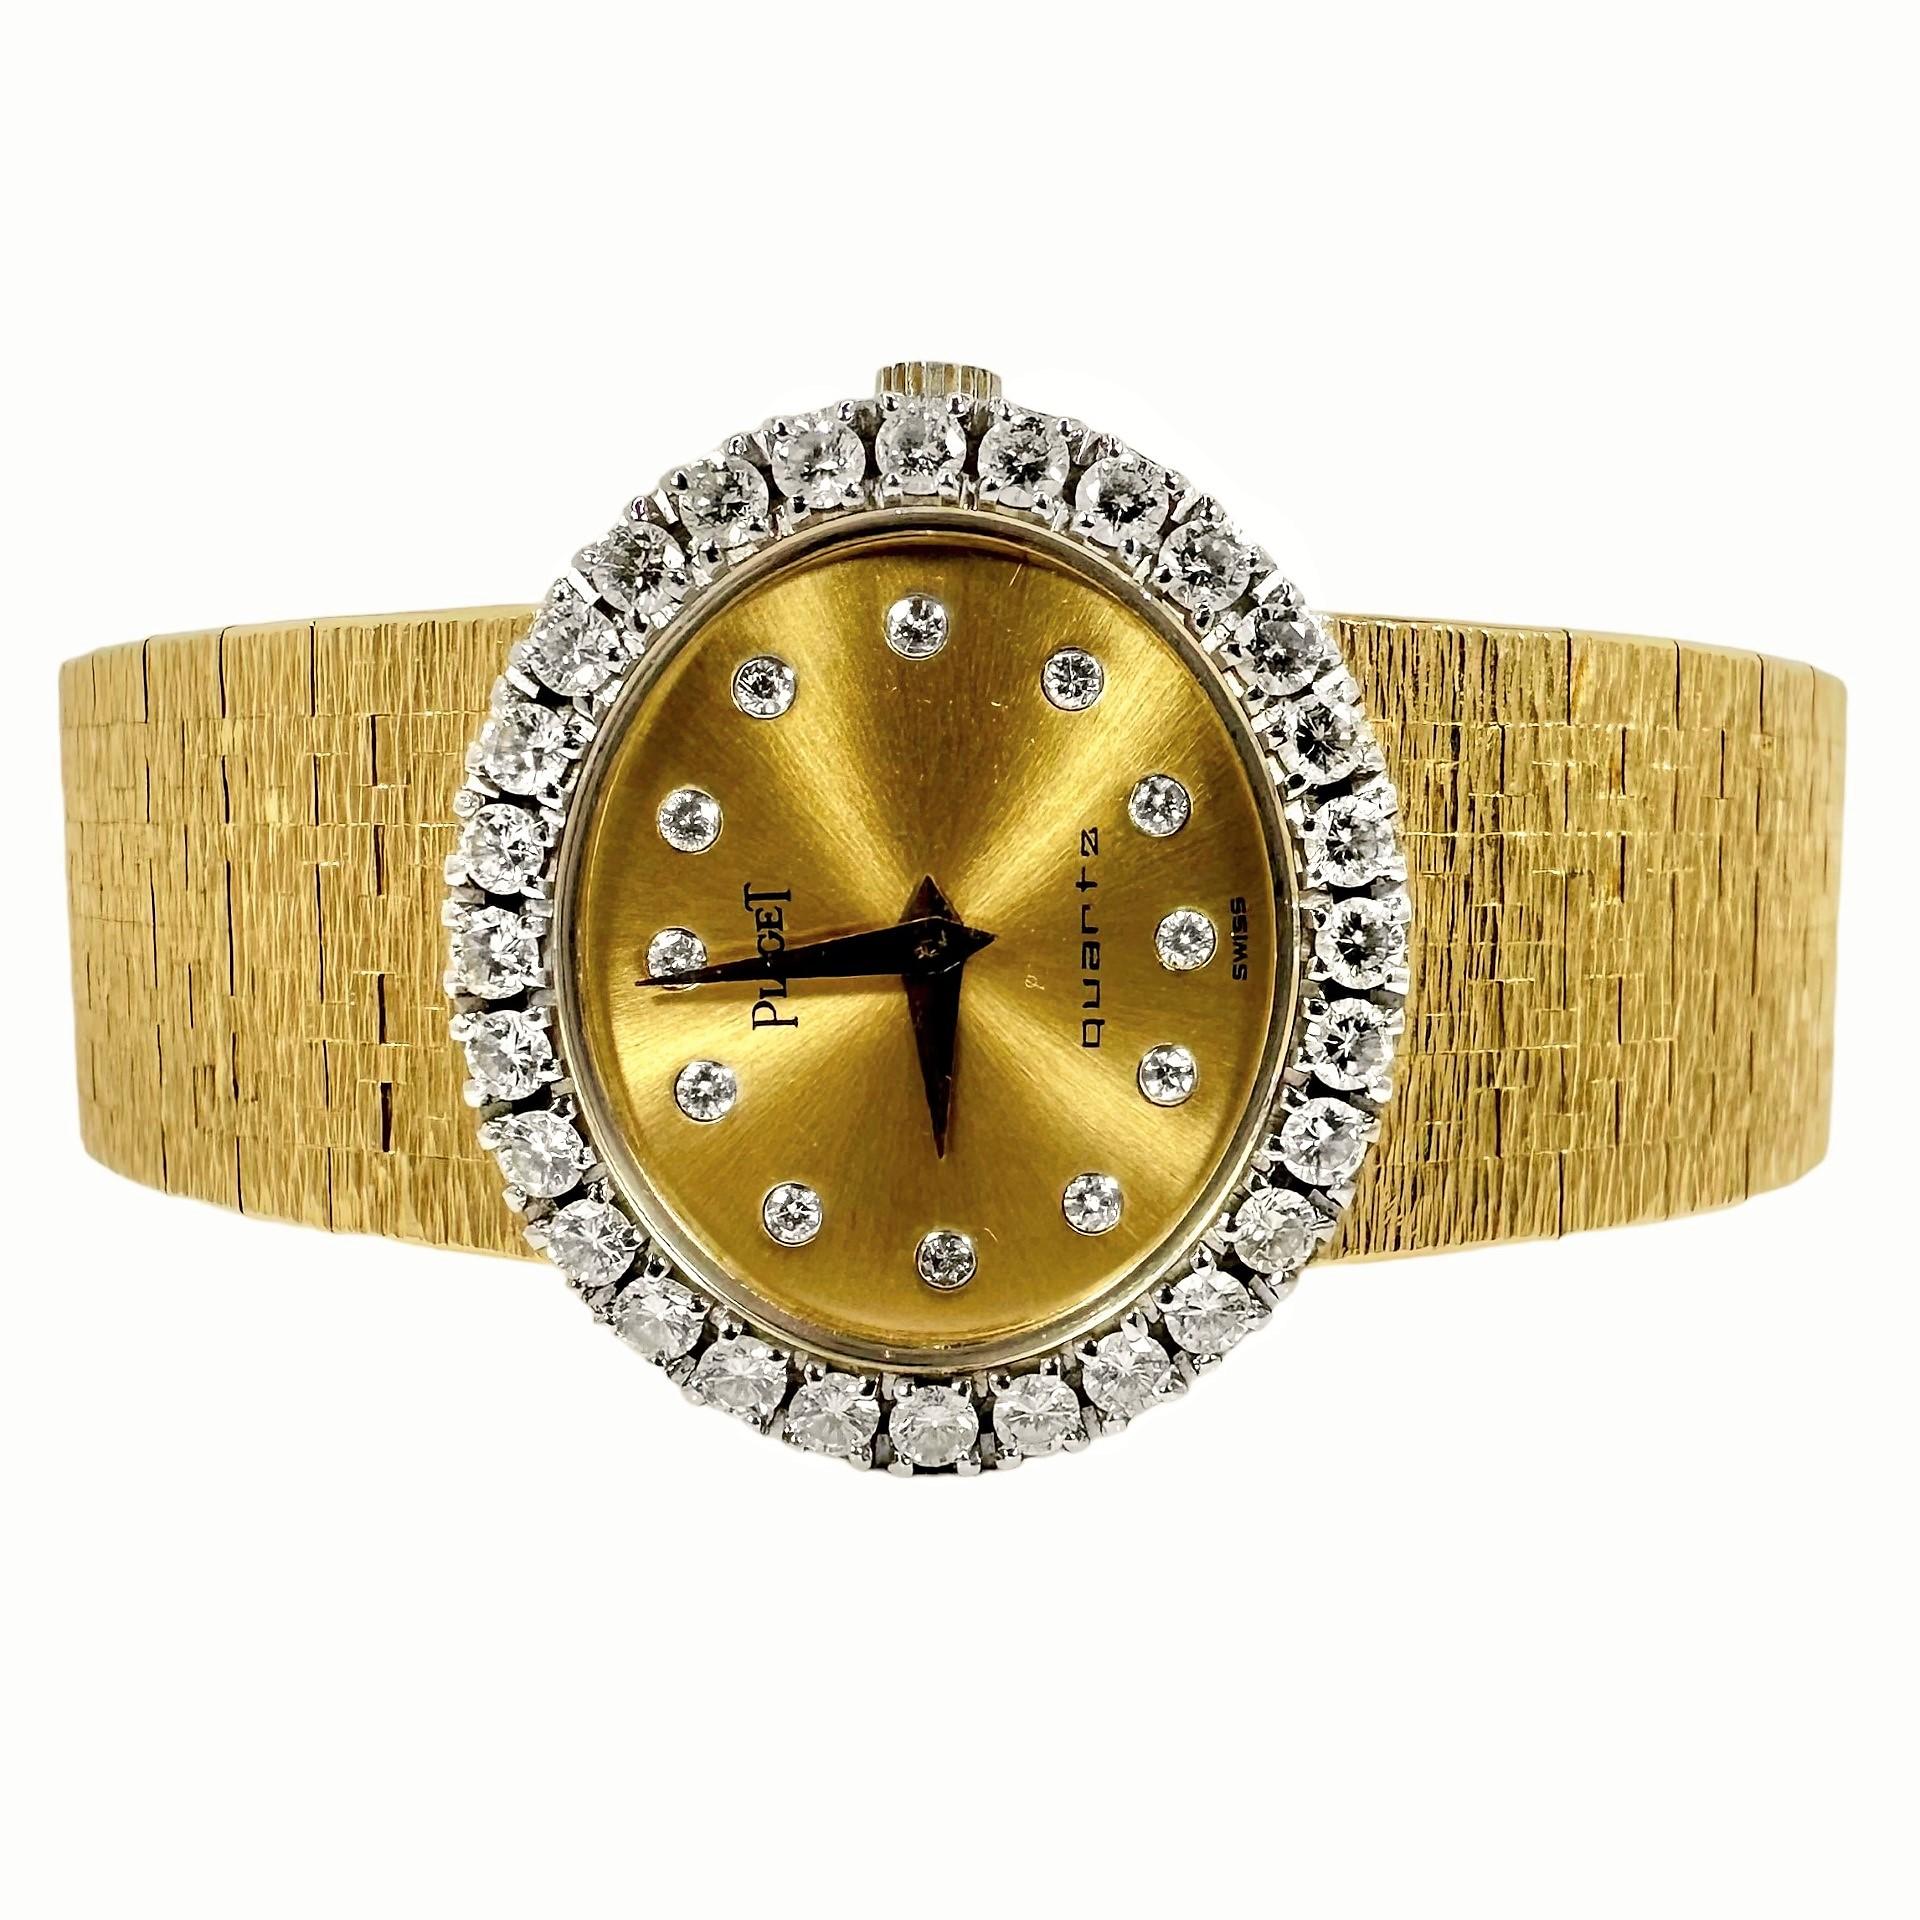 This skillfully executed 18k yellow gold and diamond ladies oval dial Piaget wrist watch is truly a magnificent example of the genre. Every surface glitters, either from light reflecting off of it's textured gold surfaces or light causing every